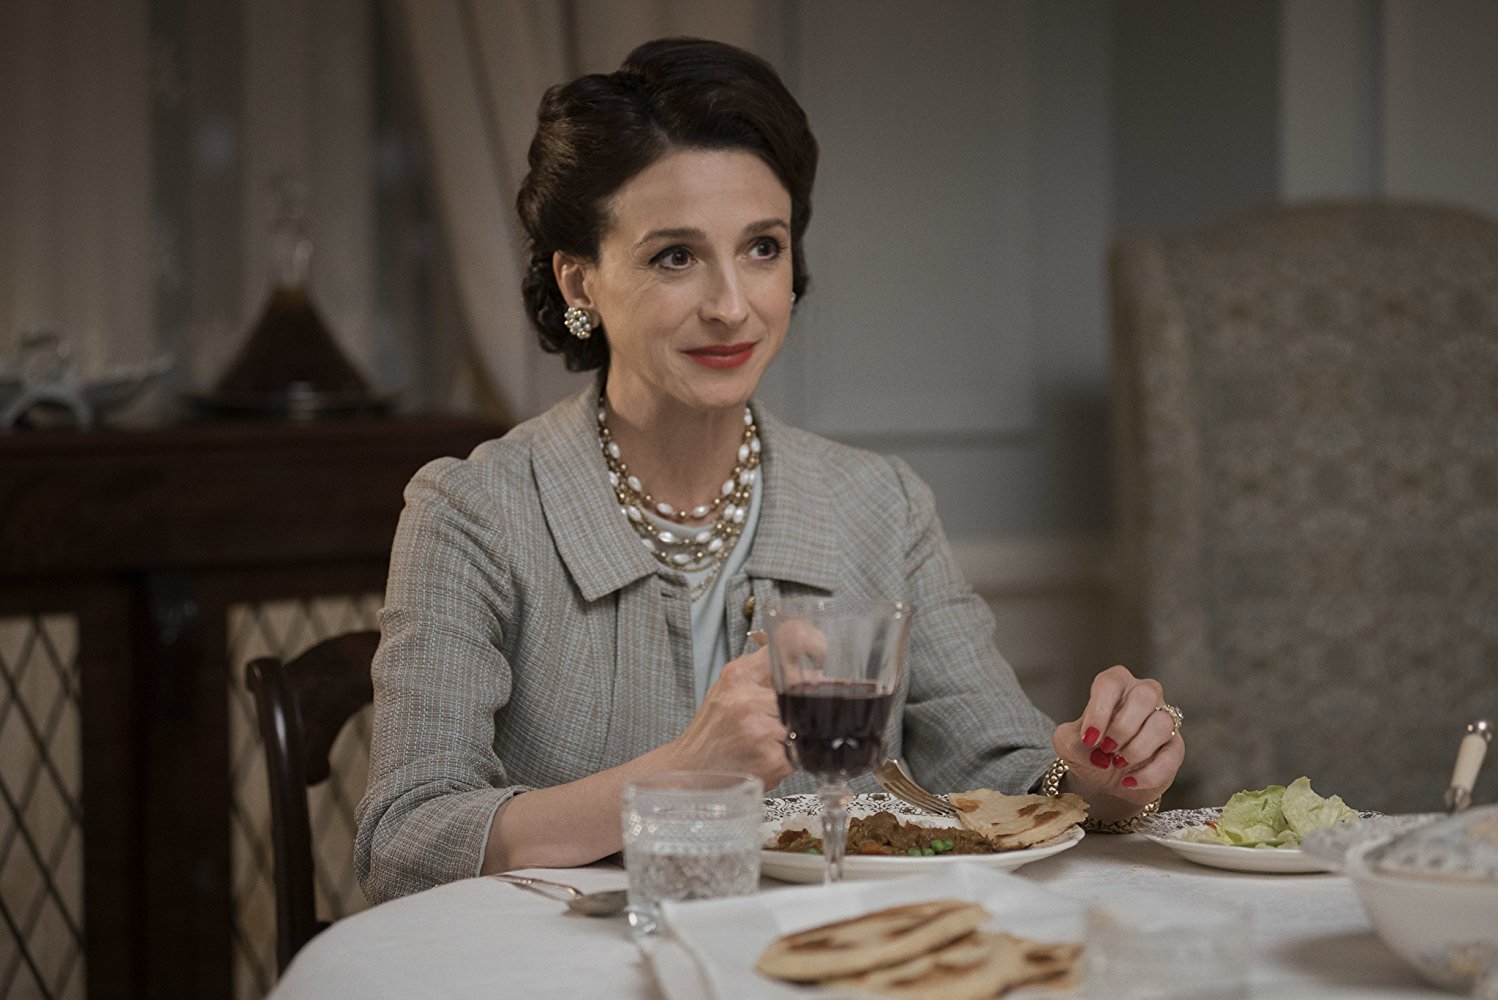 THE MARVELOUS MRS MAISEL Series Trailer, Images and Poster | The ...